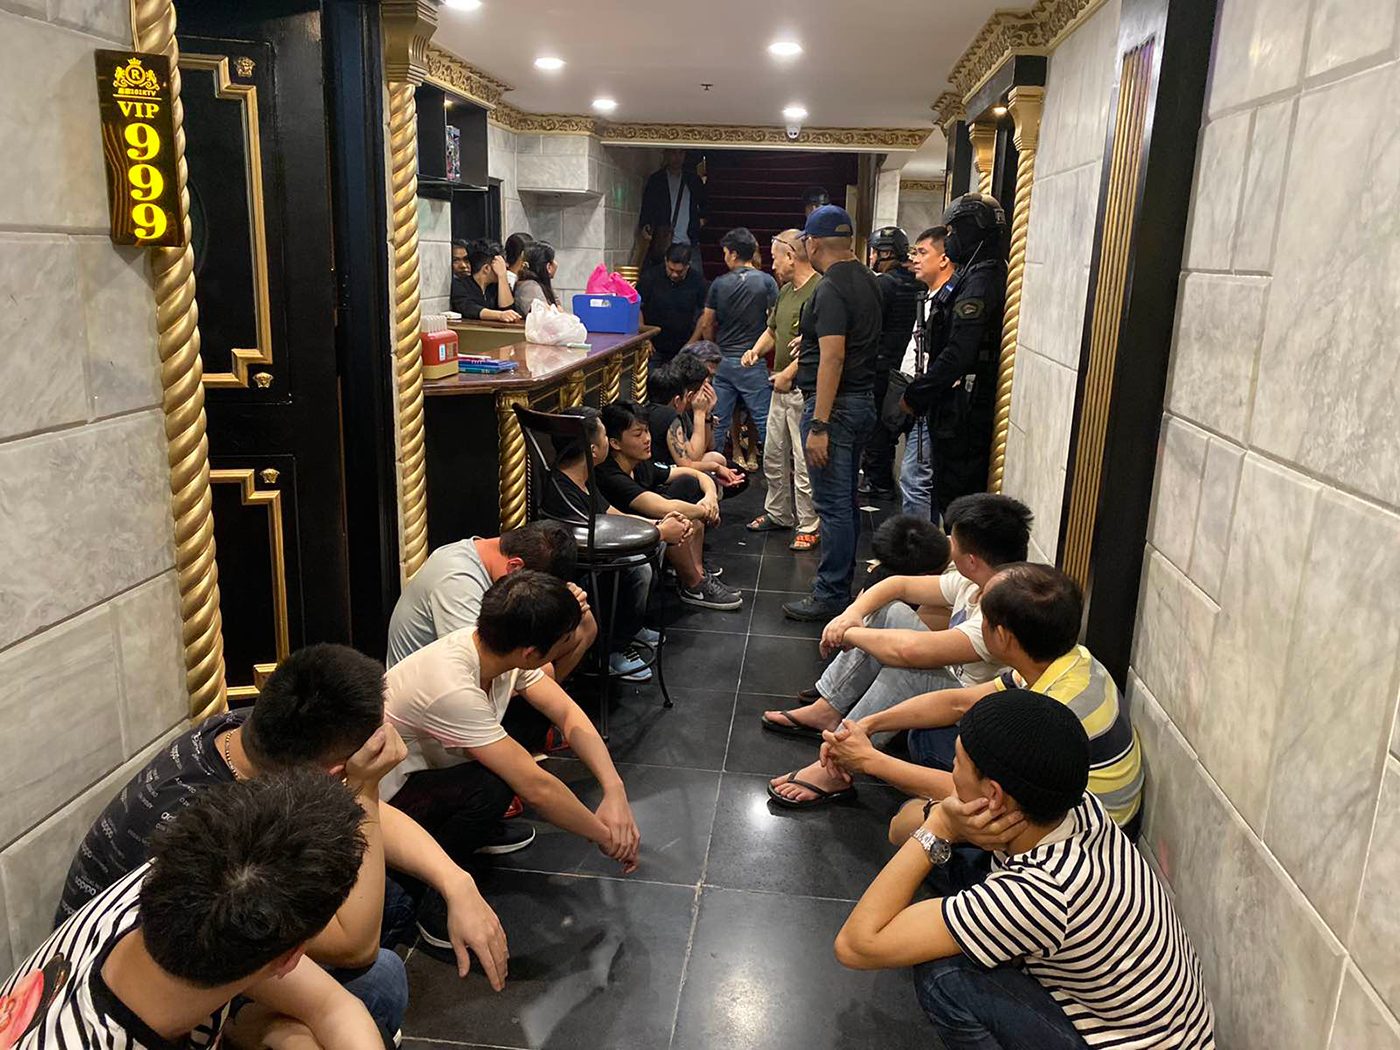 Police arrest 16 foreigners in raid of hotel penthouse used for prostitution